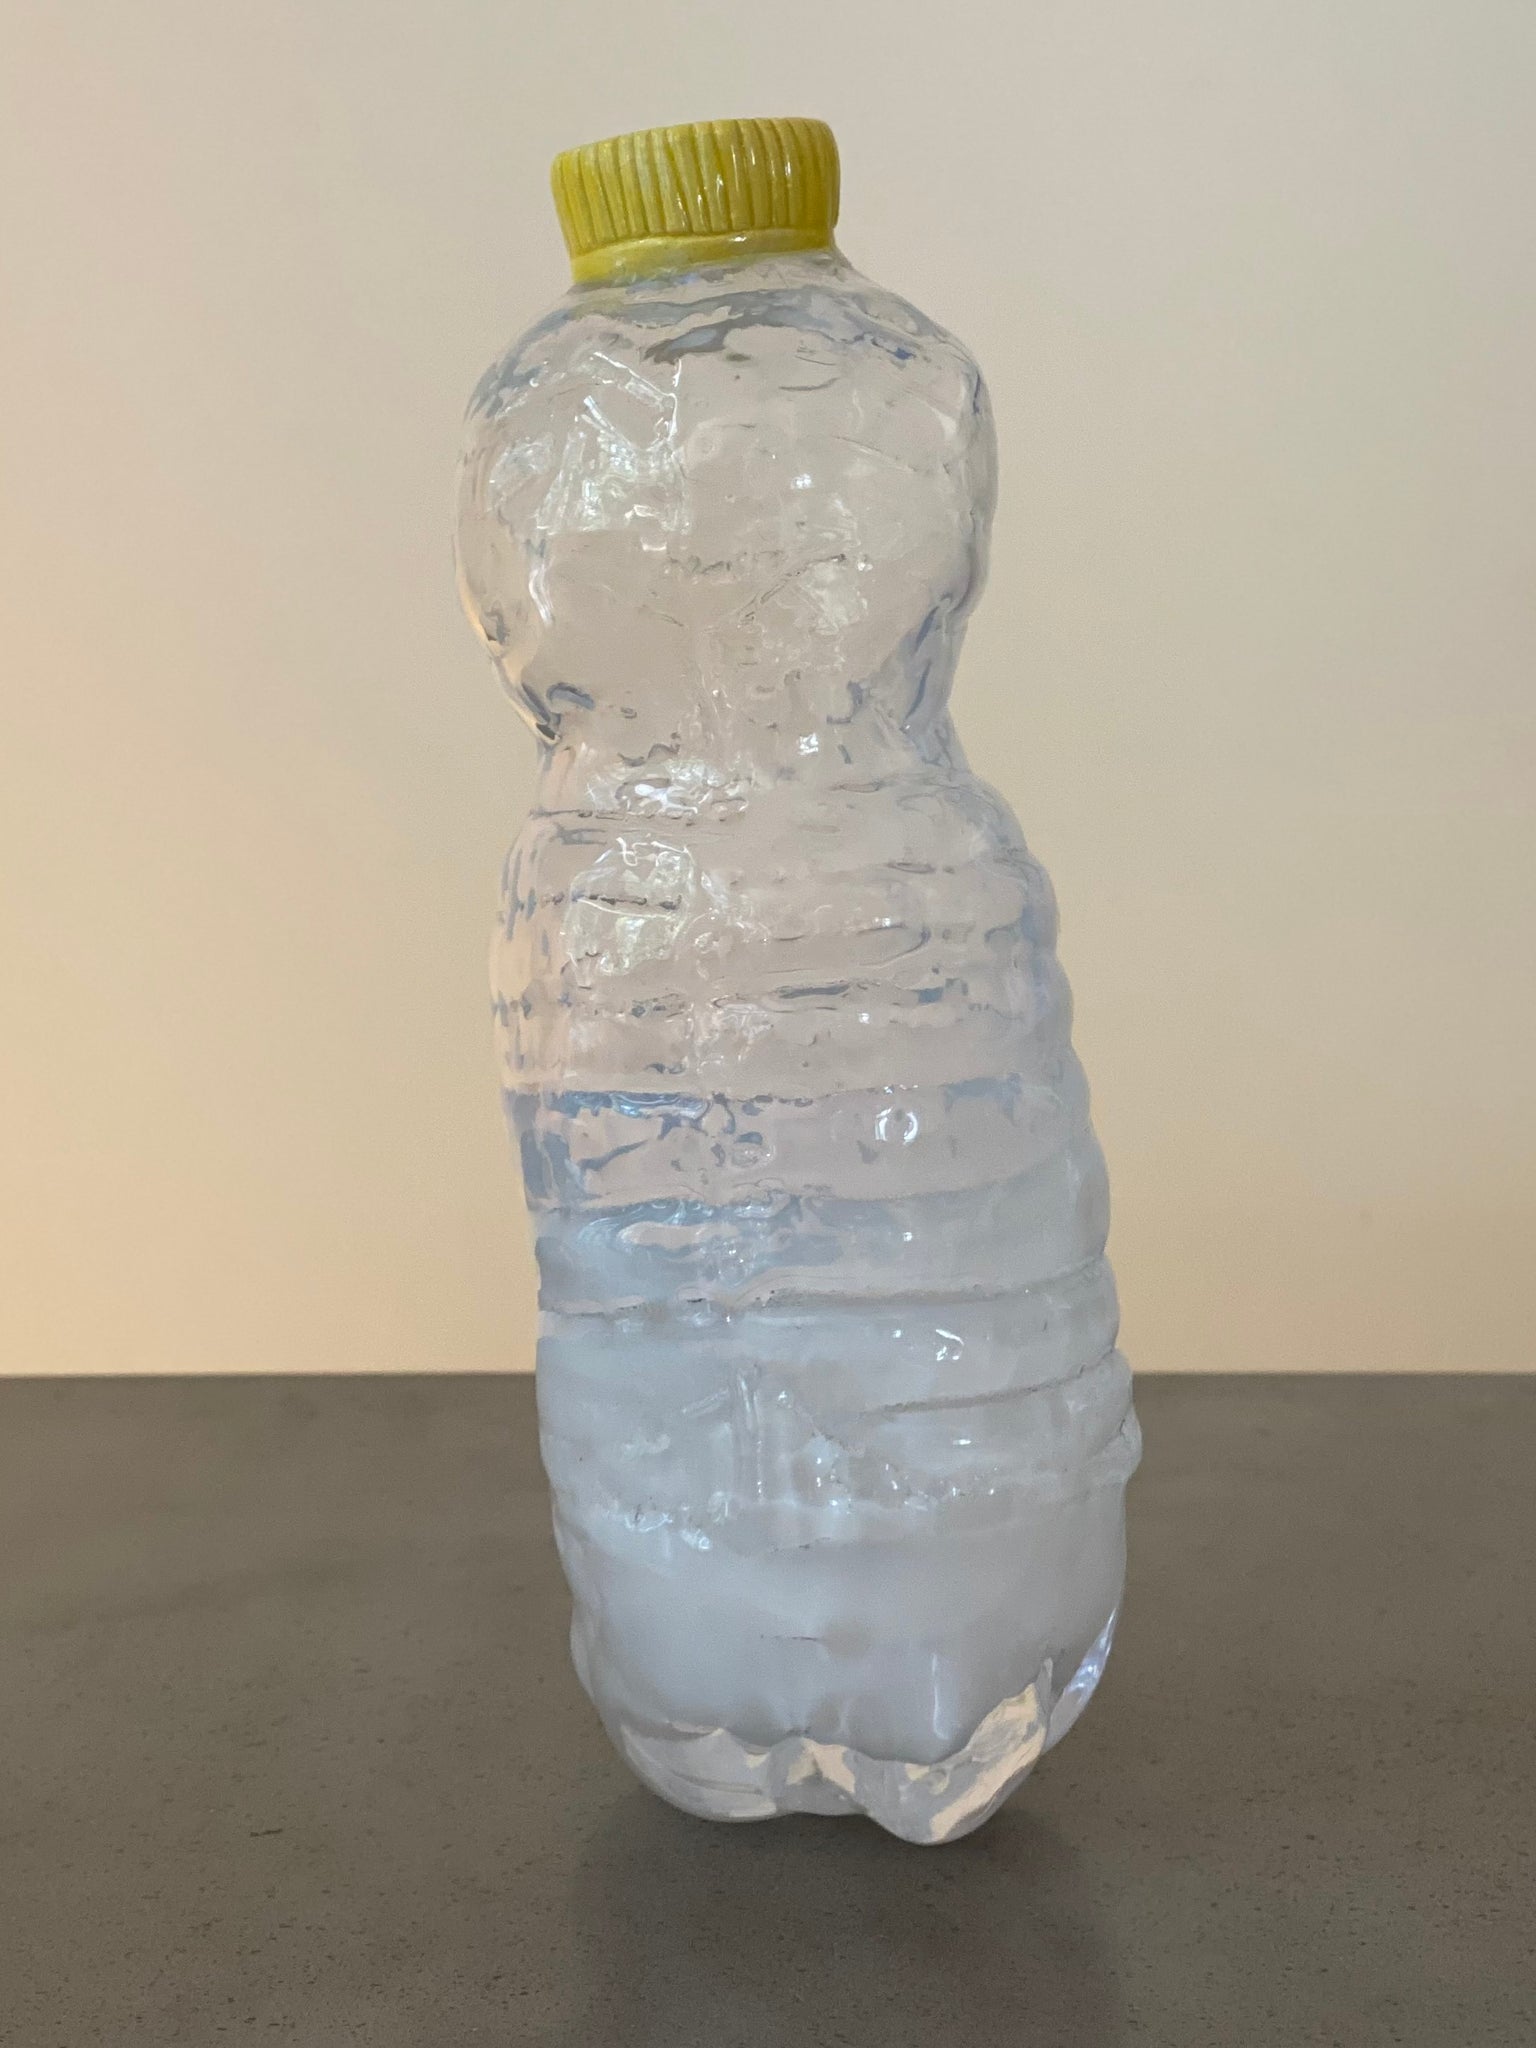 Koos Buster, "Bottle (White, Yellow)" SOLD